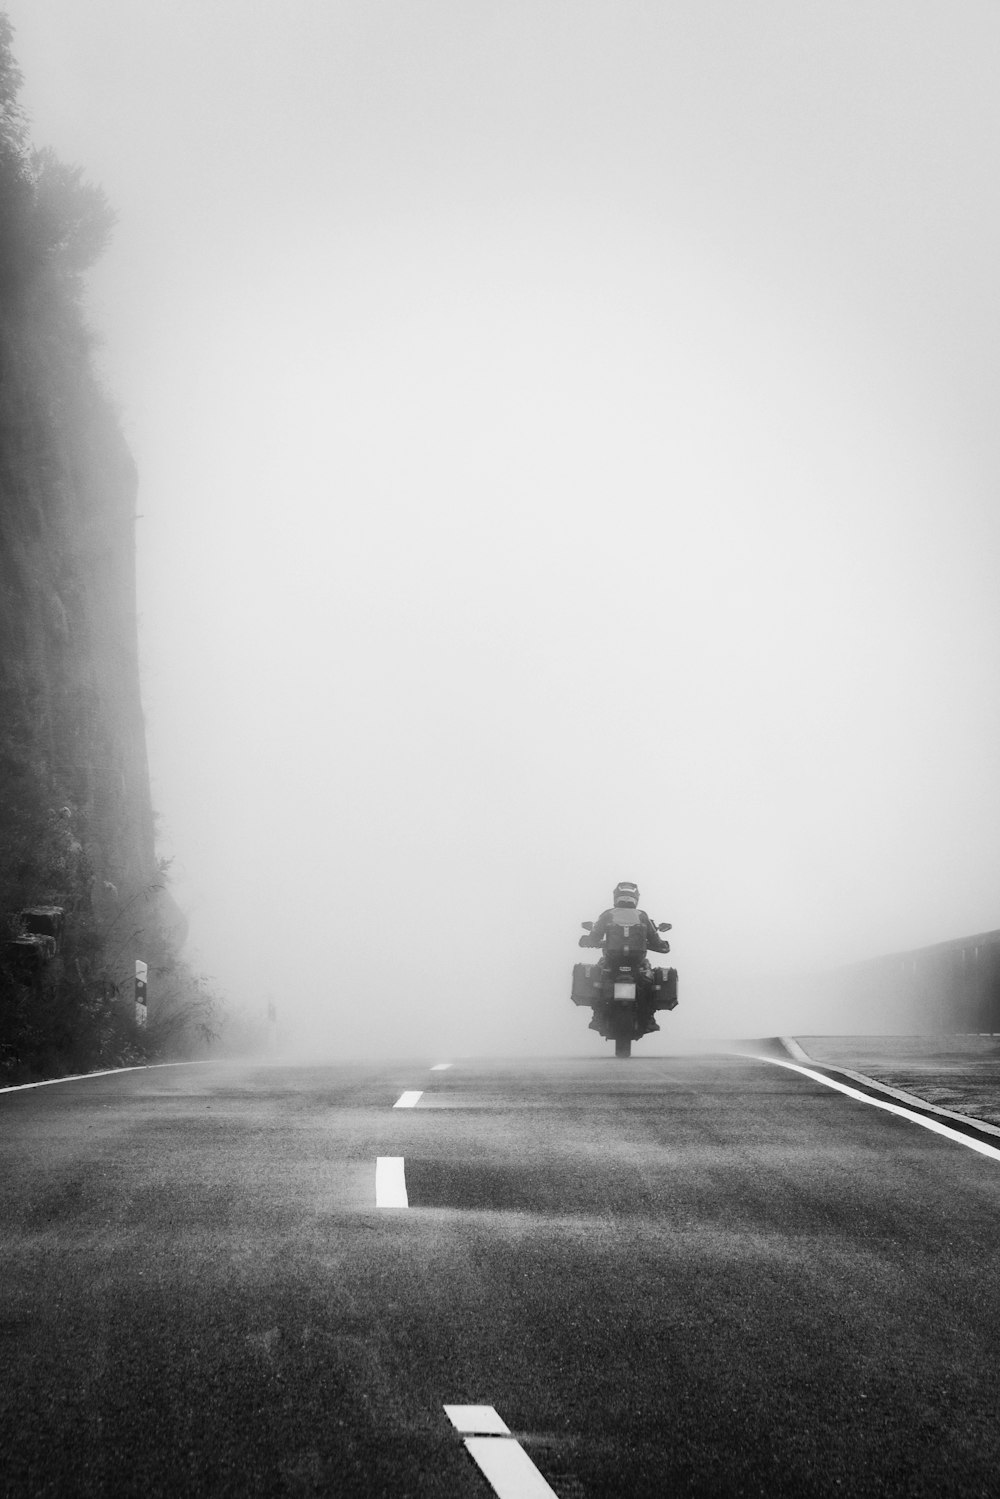 a person riding a motorcycle on a foggy road